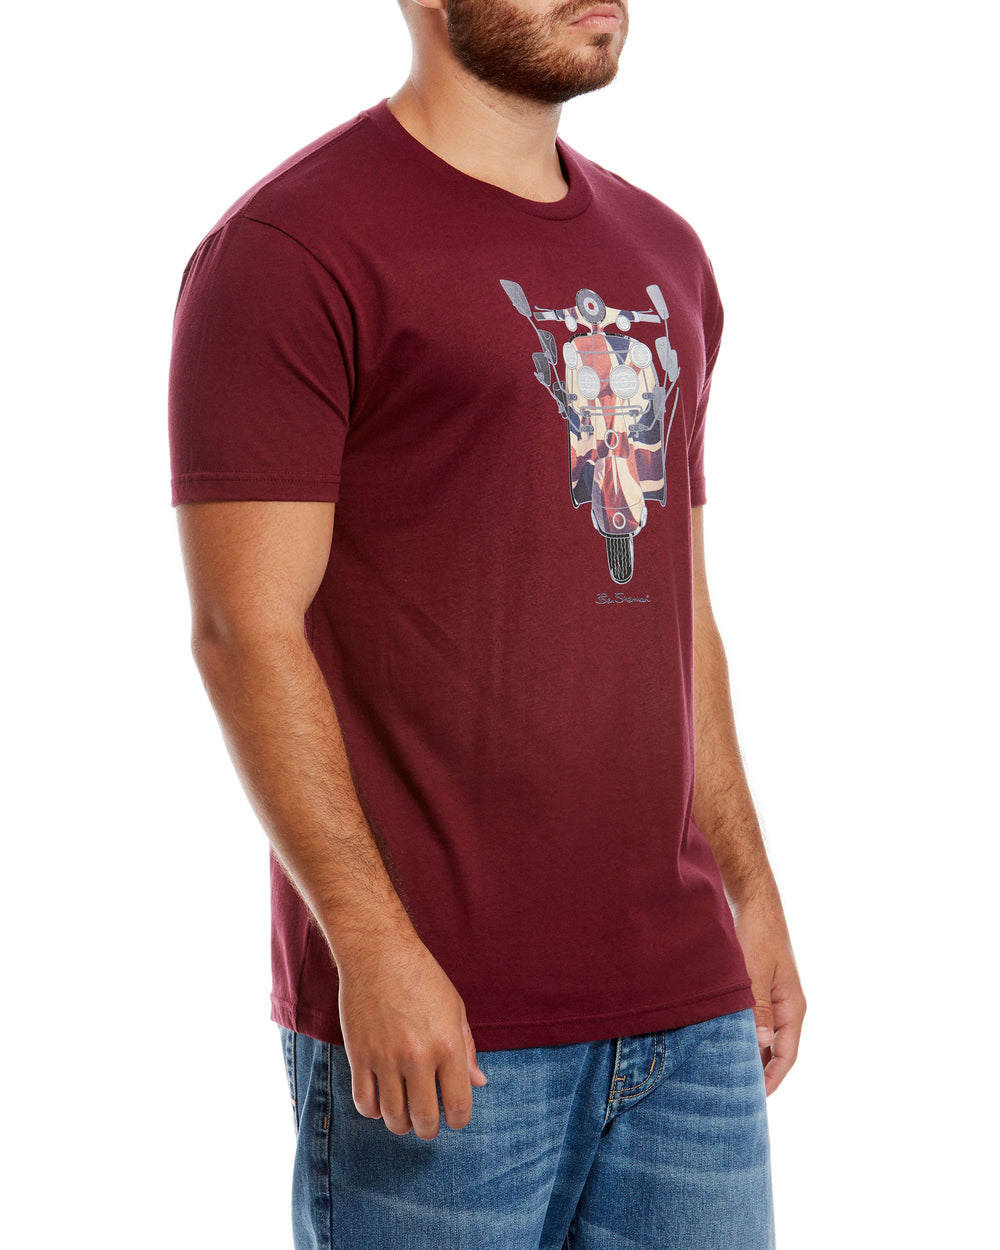 Scooter Flag Graphic Tee - Maroon